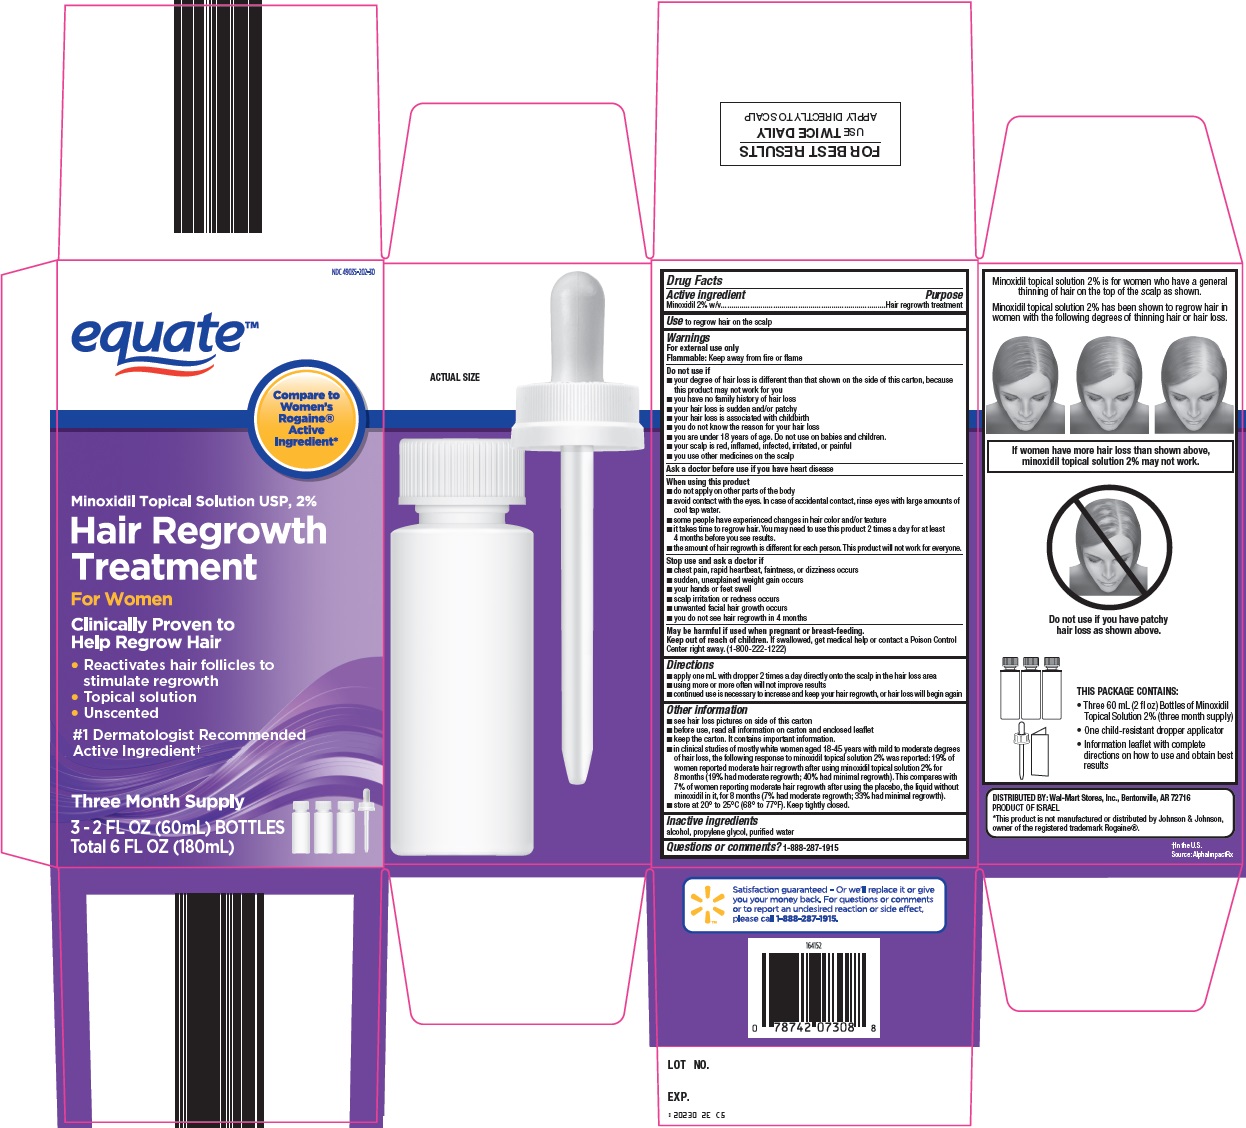 Equate Hair Regrowth Treatment image